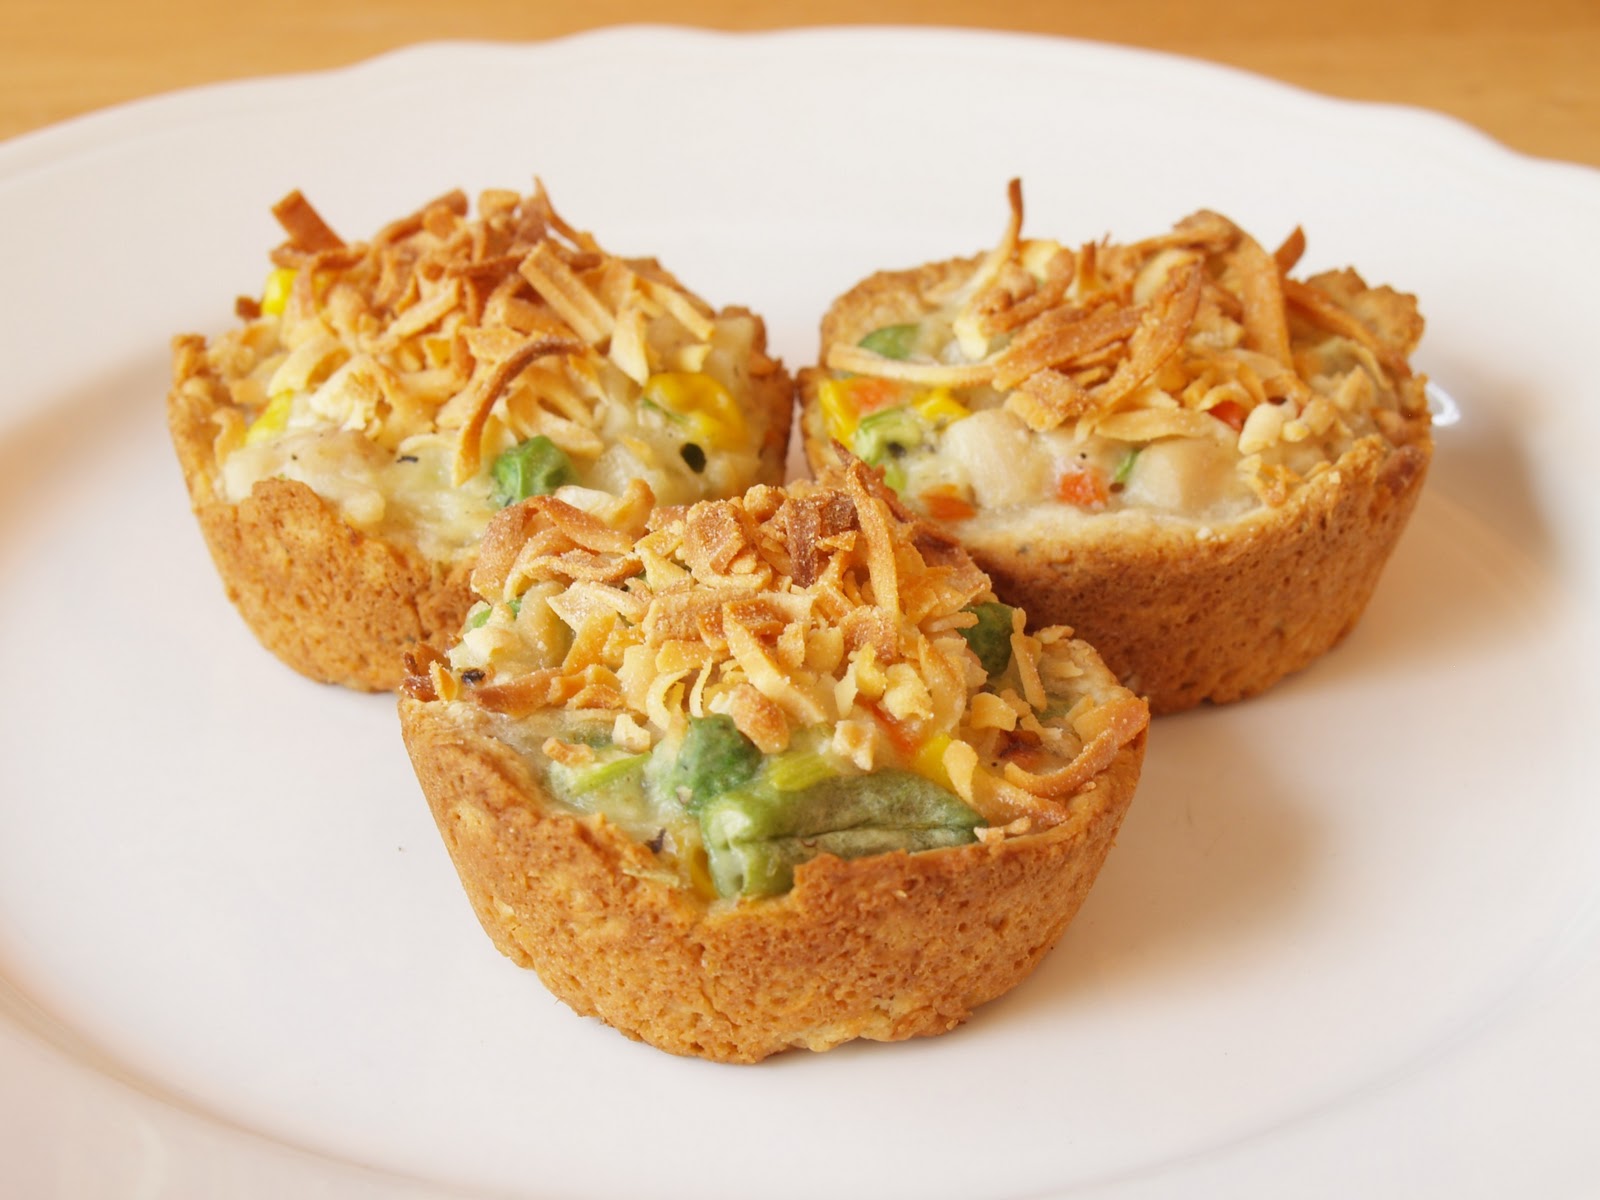 Why Just Eat When You Can Thrive: Mini Chicken Pot Pies